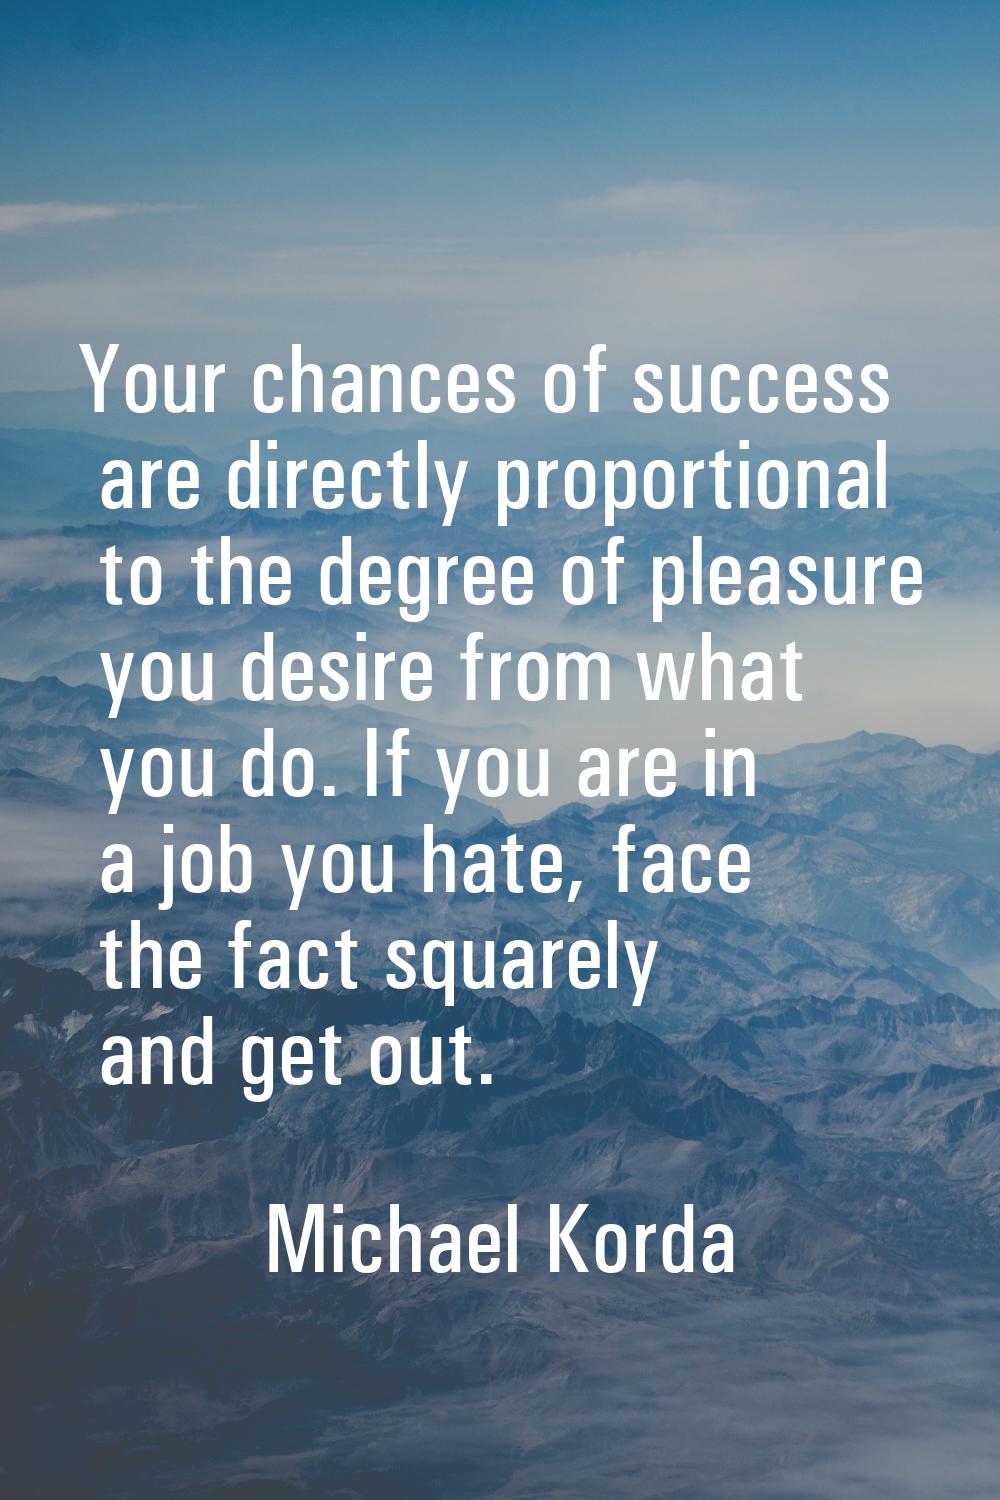 Your chances of success are directly proportional to the degree of pleasure you desire from what yo